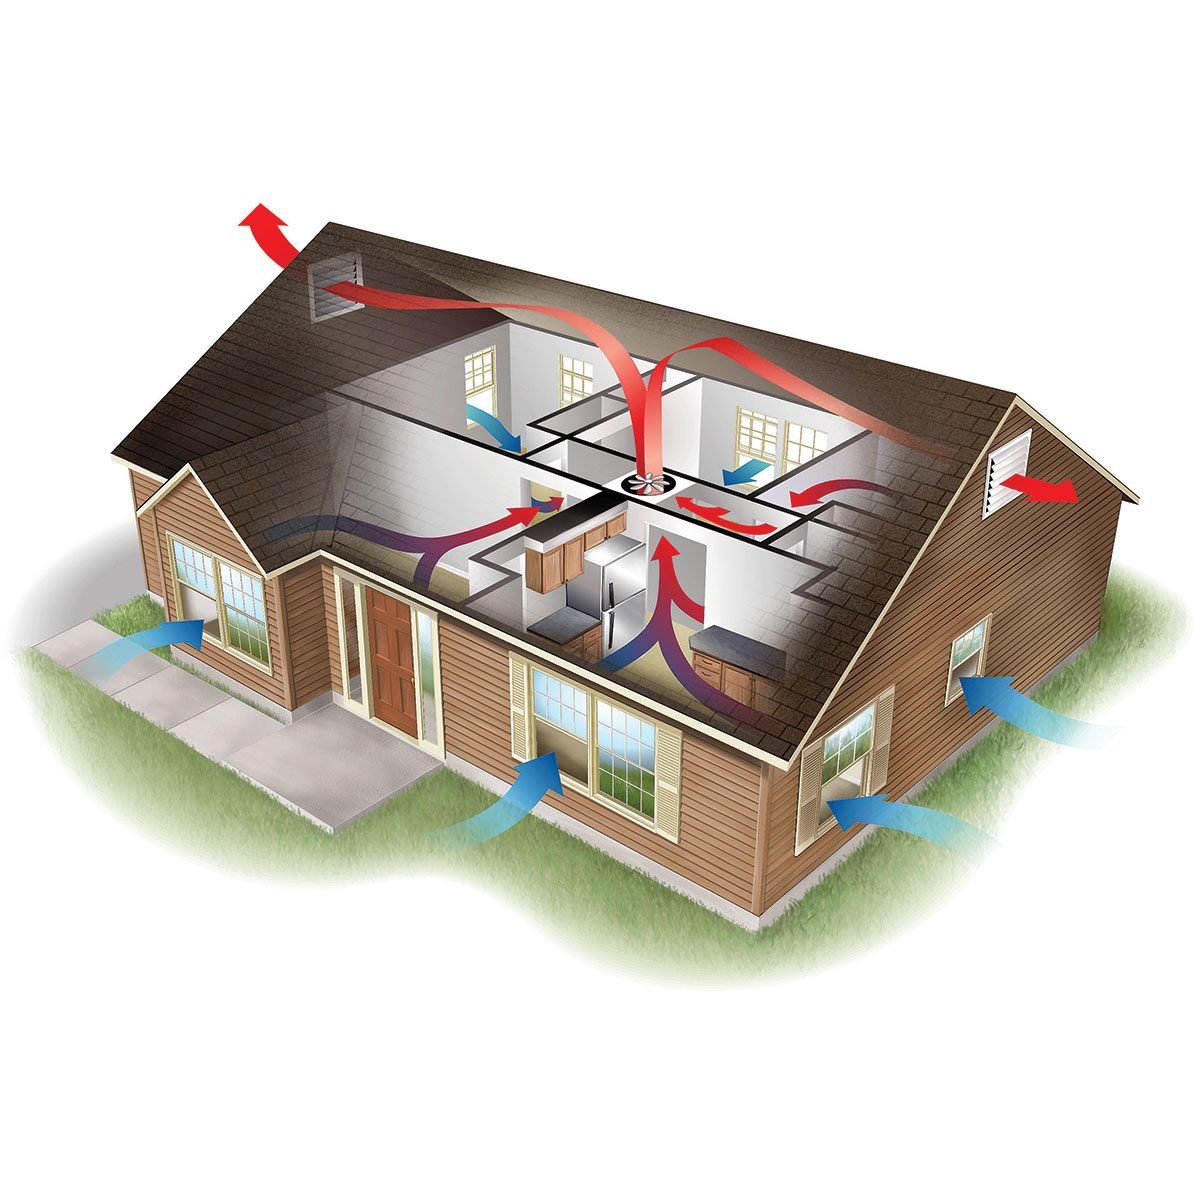 Three Ways Ventilation Fans Can Help Your Home